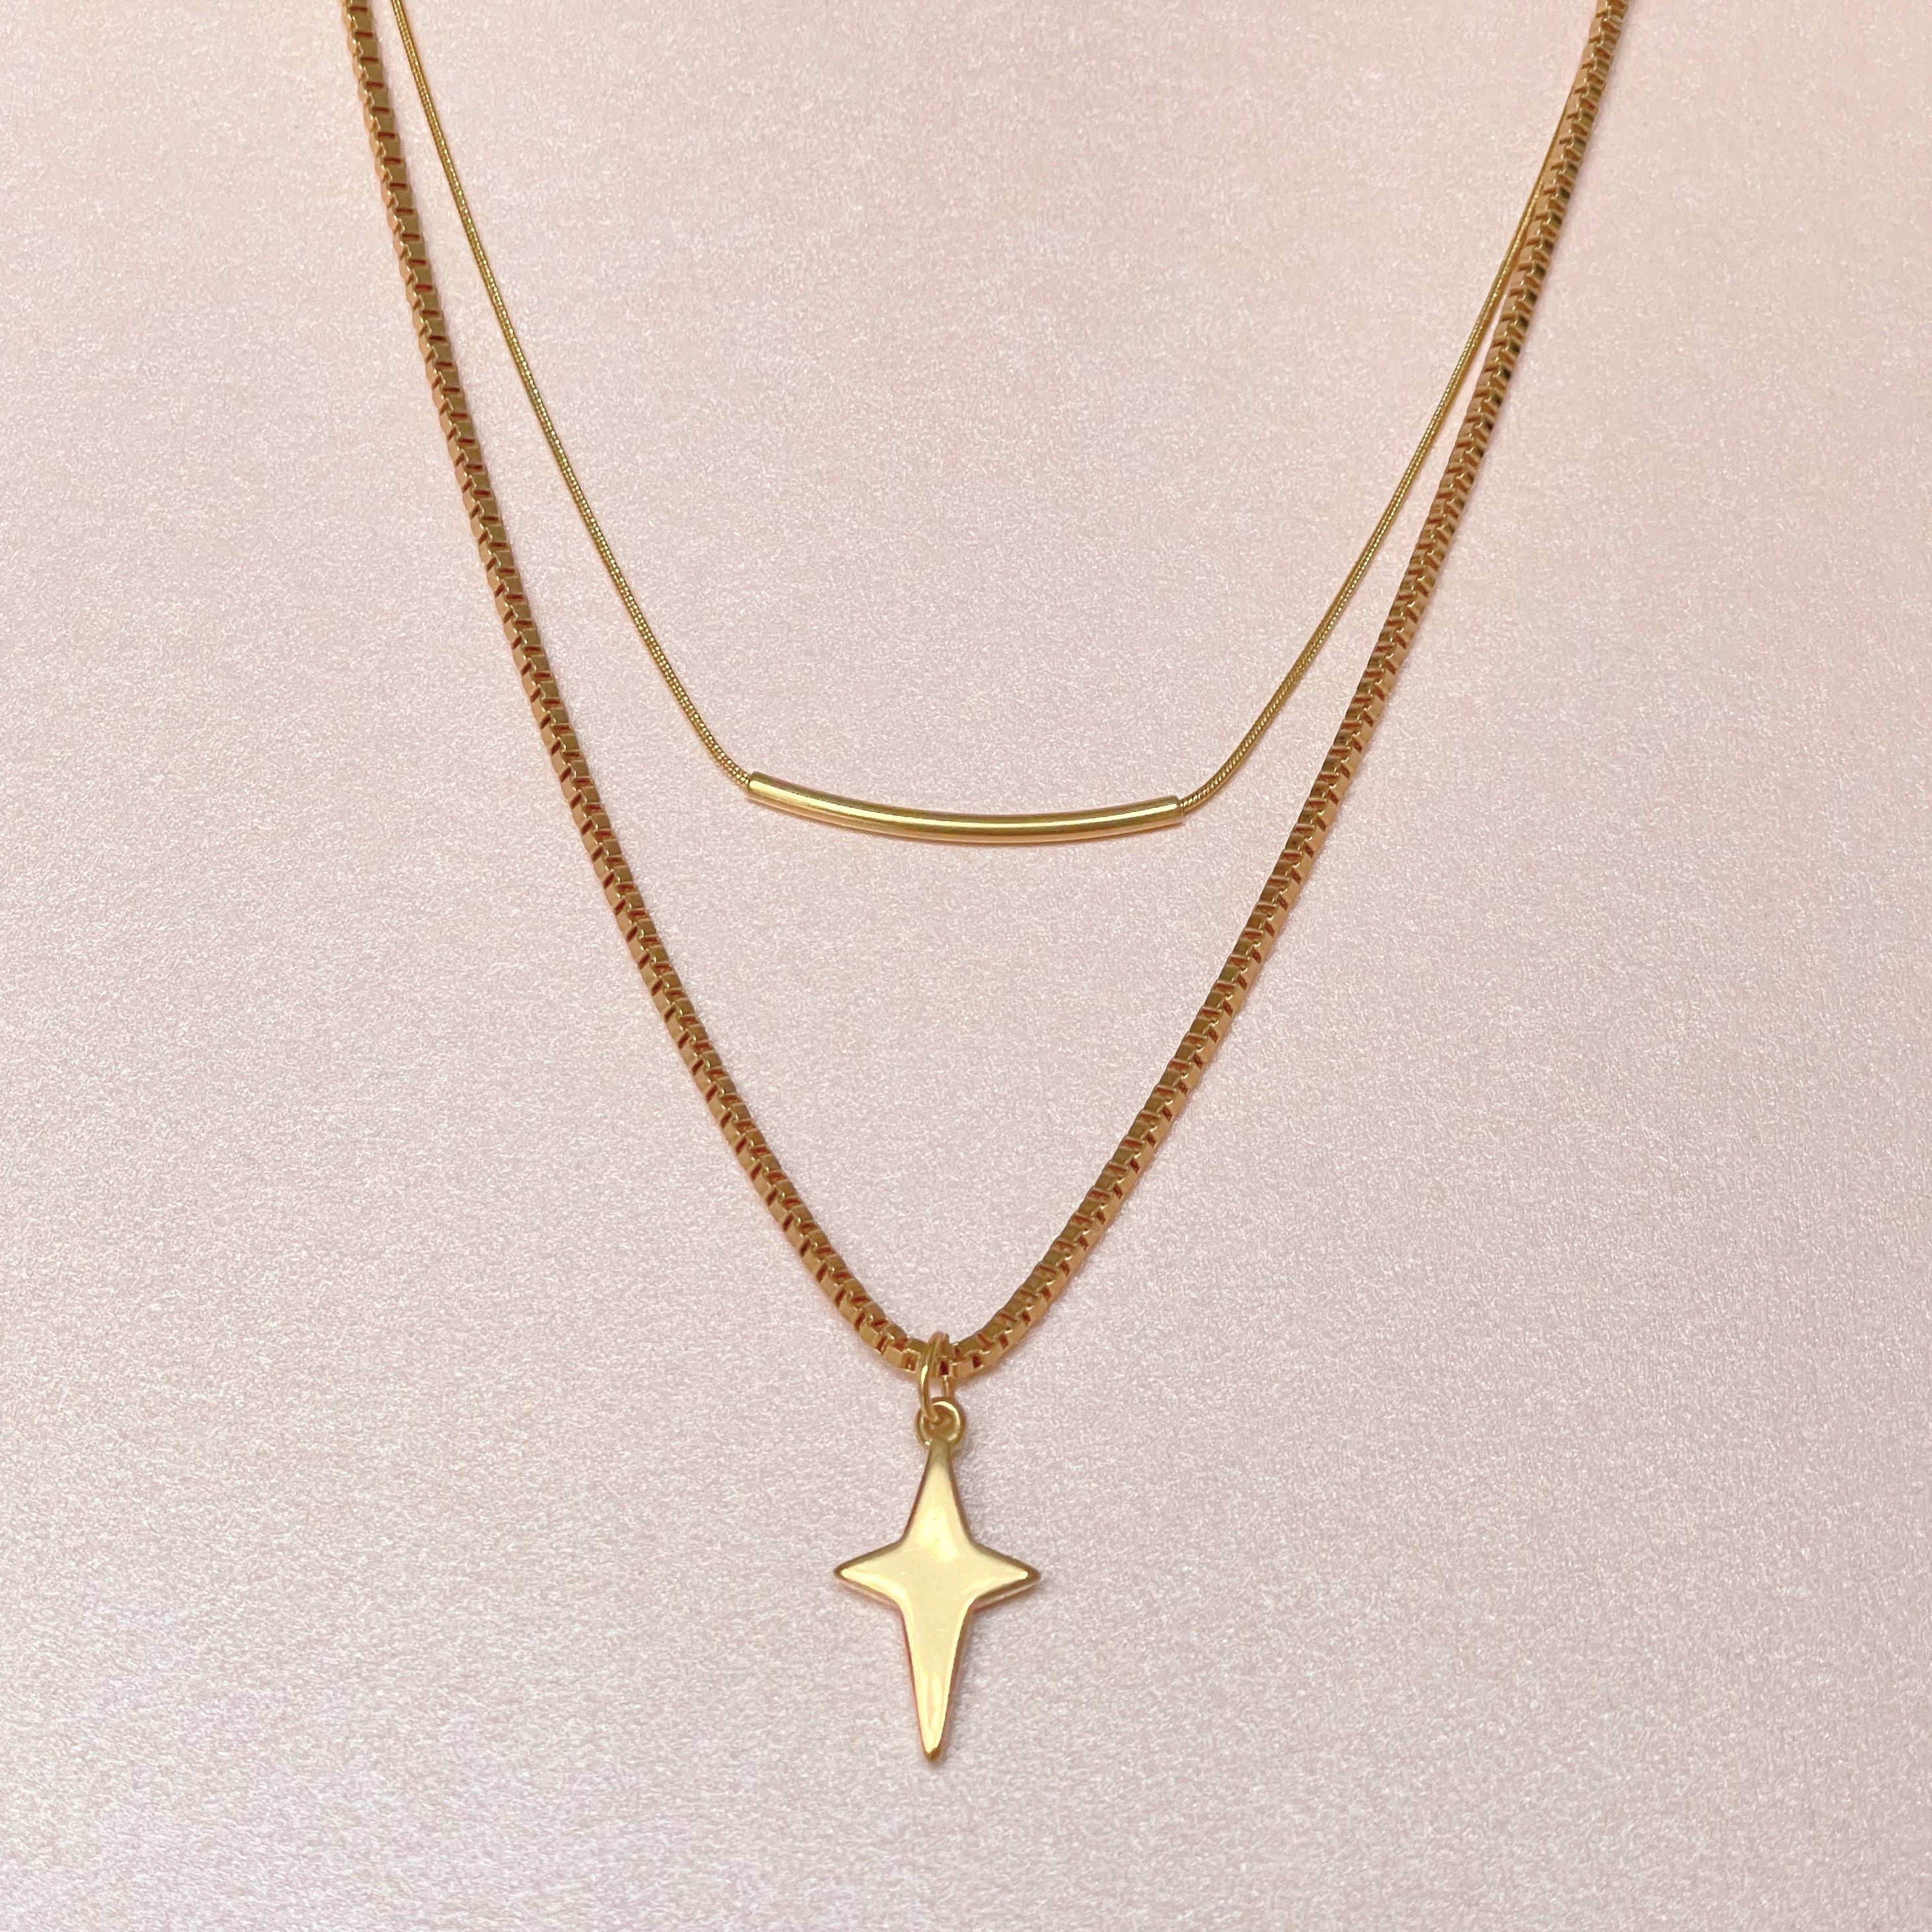 Taliana North Star Double Layer Necklace